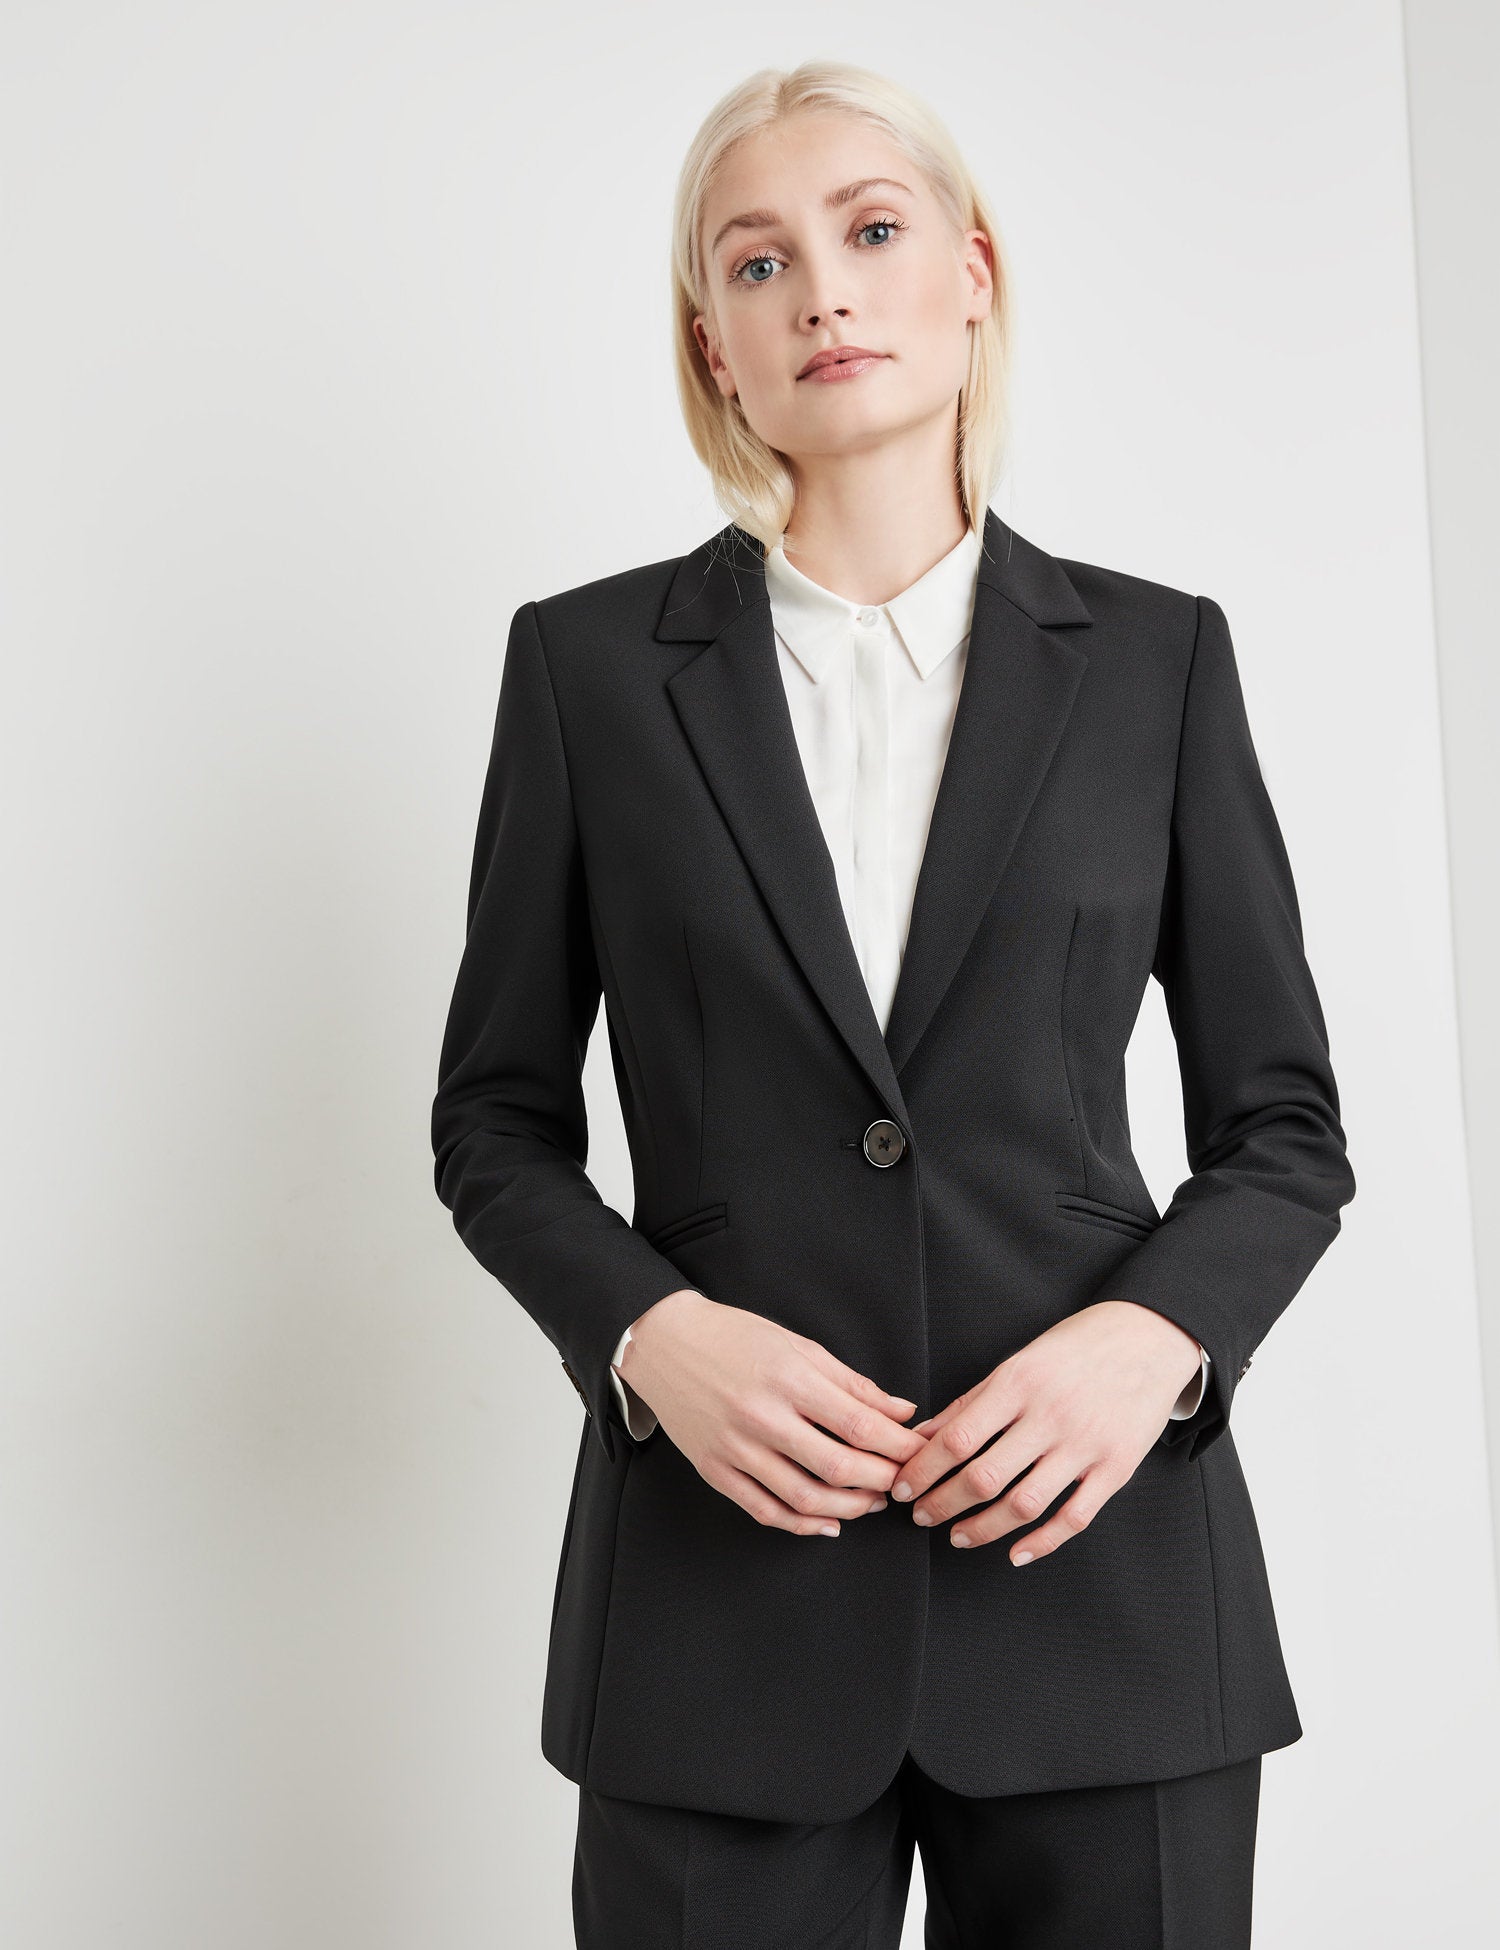 Fitted Blazer Made Of Fine Stretch Fabric_930994-19899_1100_03